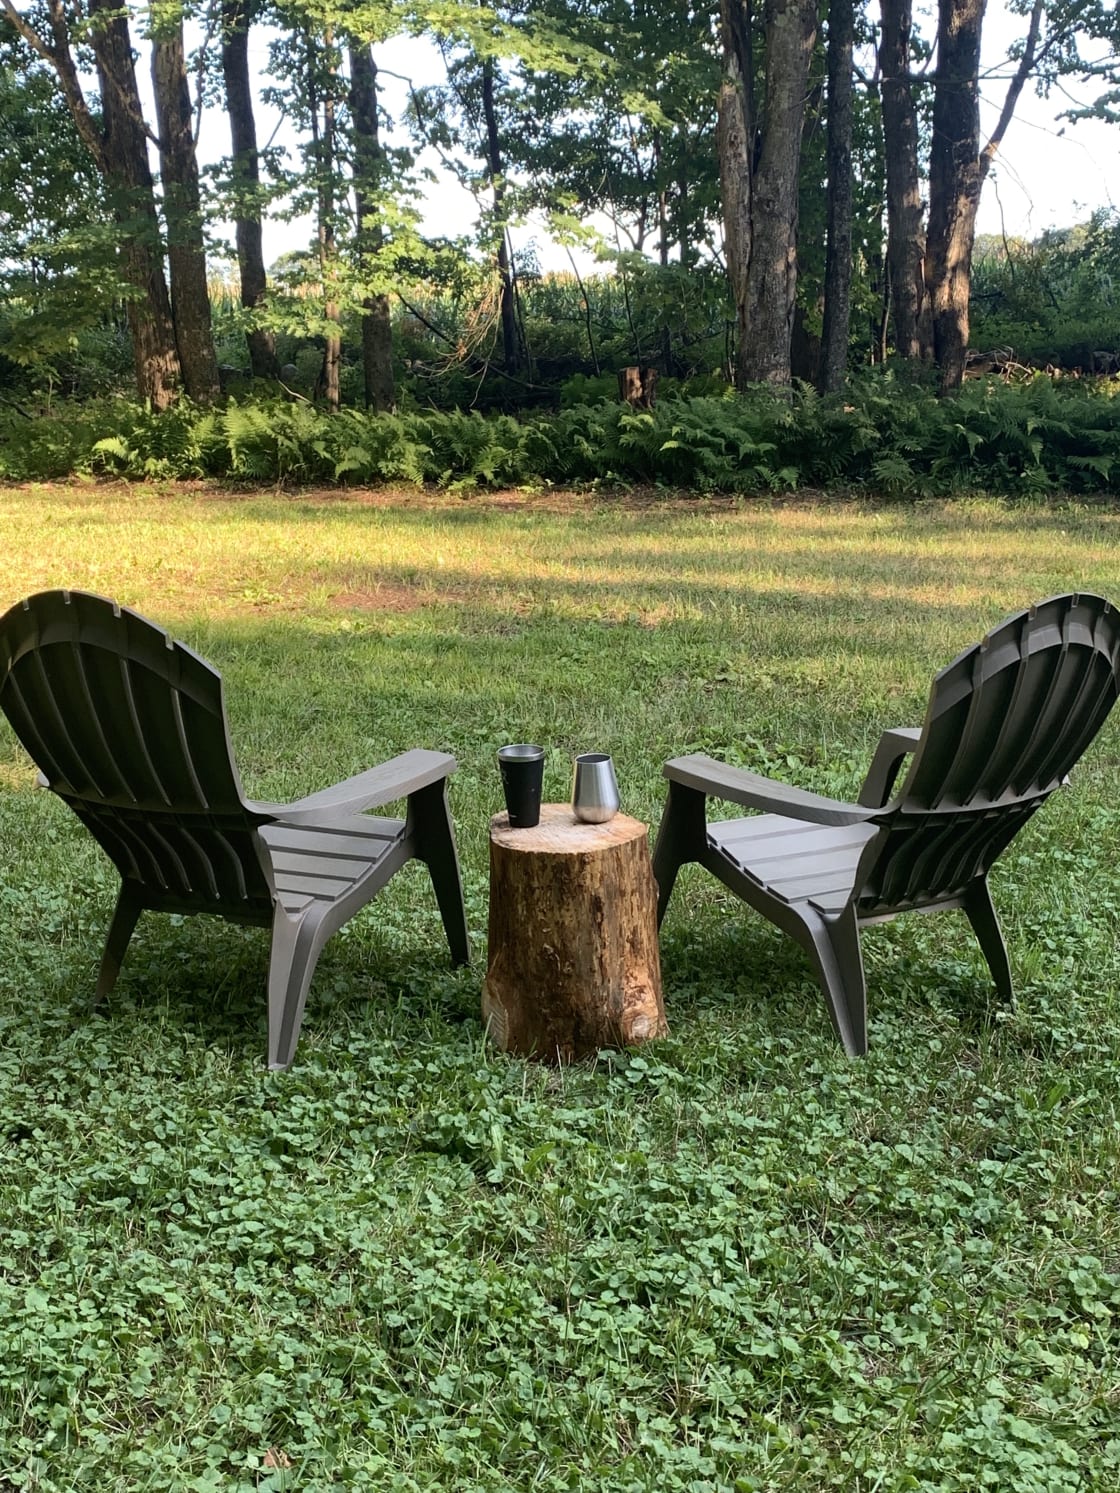 2 Chairs and log tables available. 